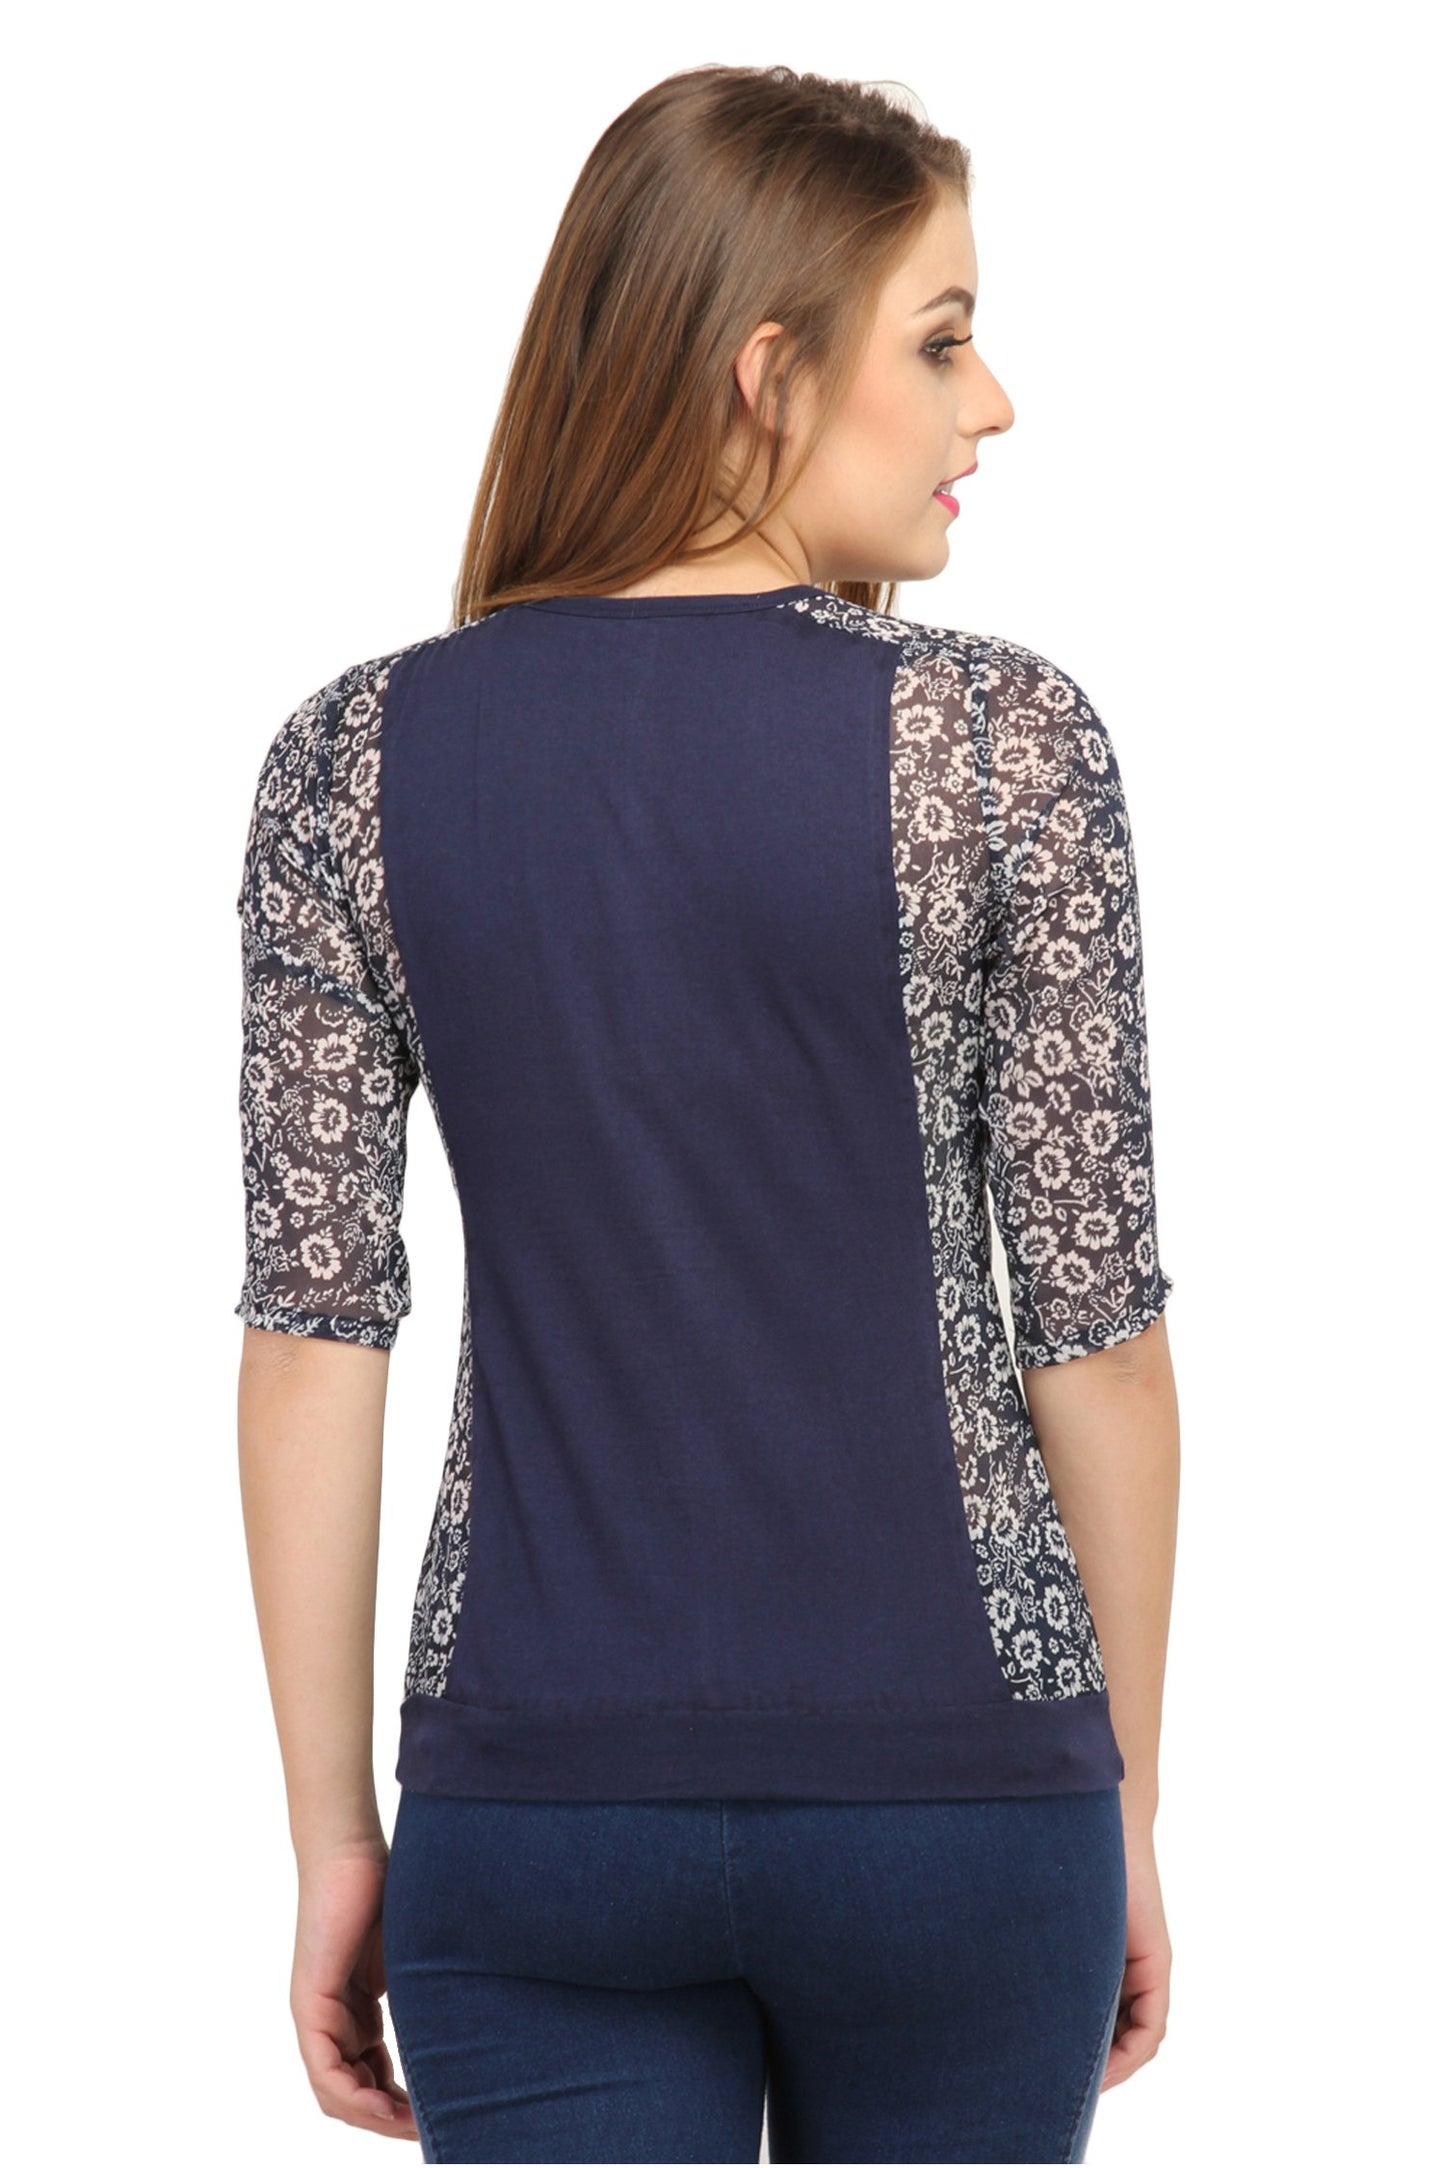 Cation Navy Top